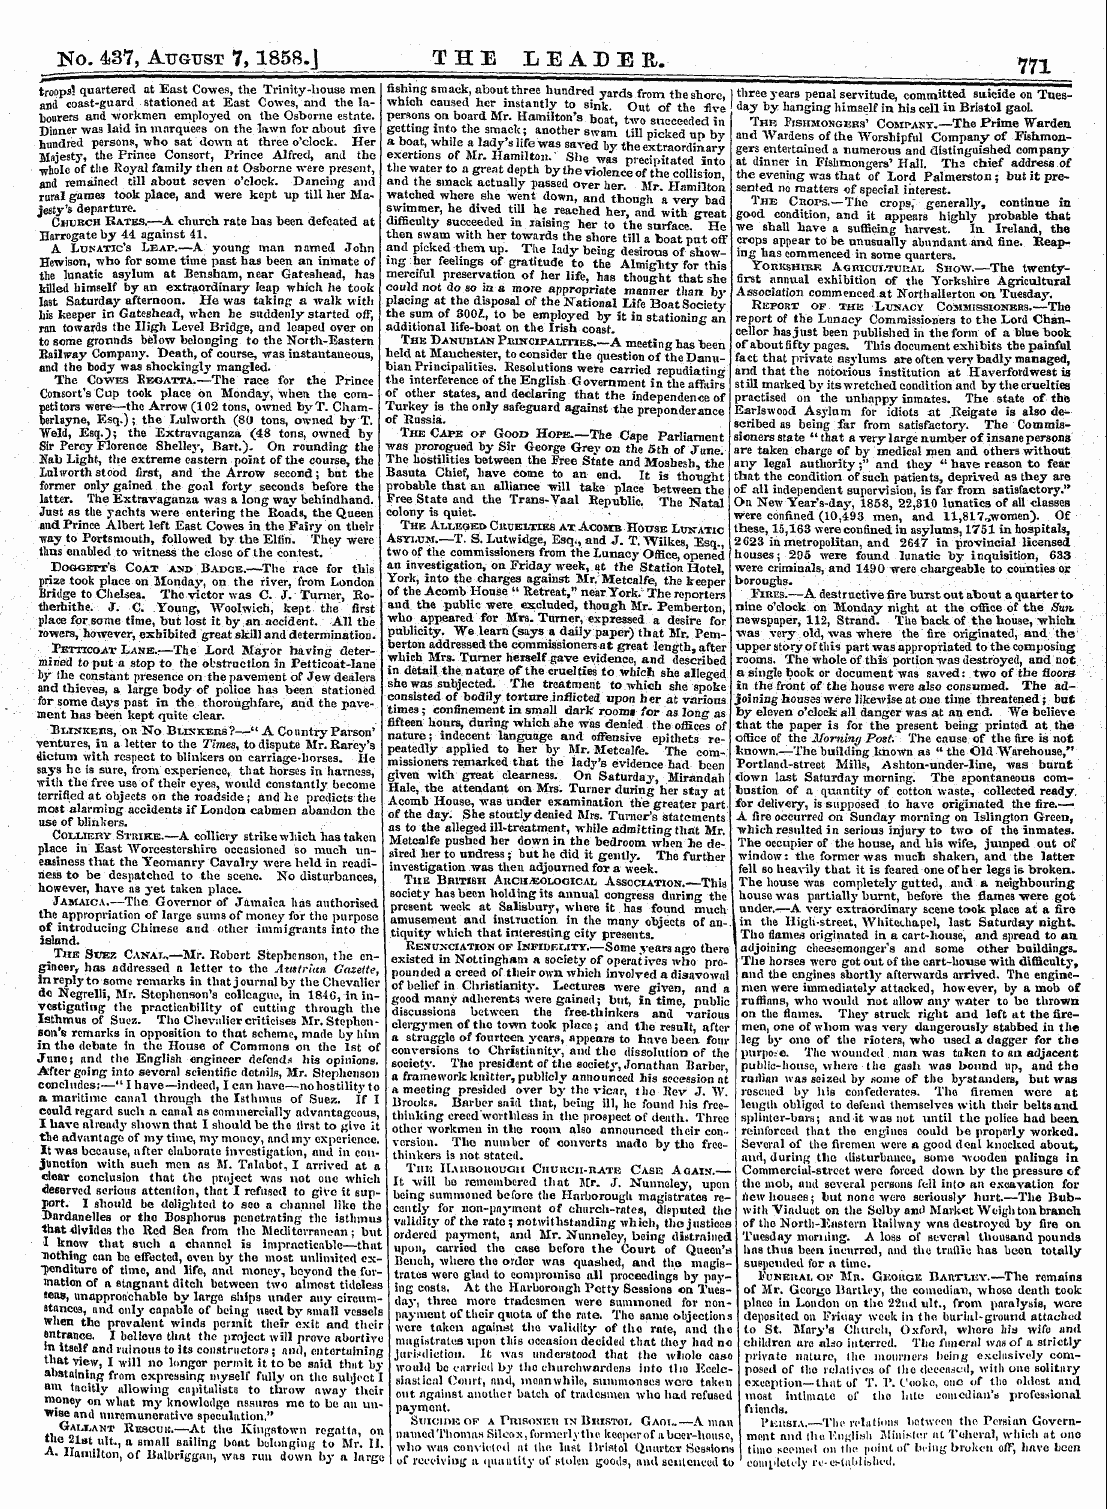 Leader (1850-1860): jS F Y, 1st edition - No. 437, August 7,1858.J The Leader. 77!